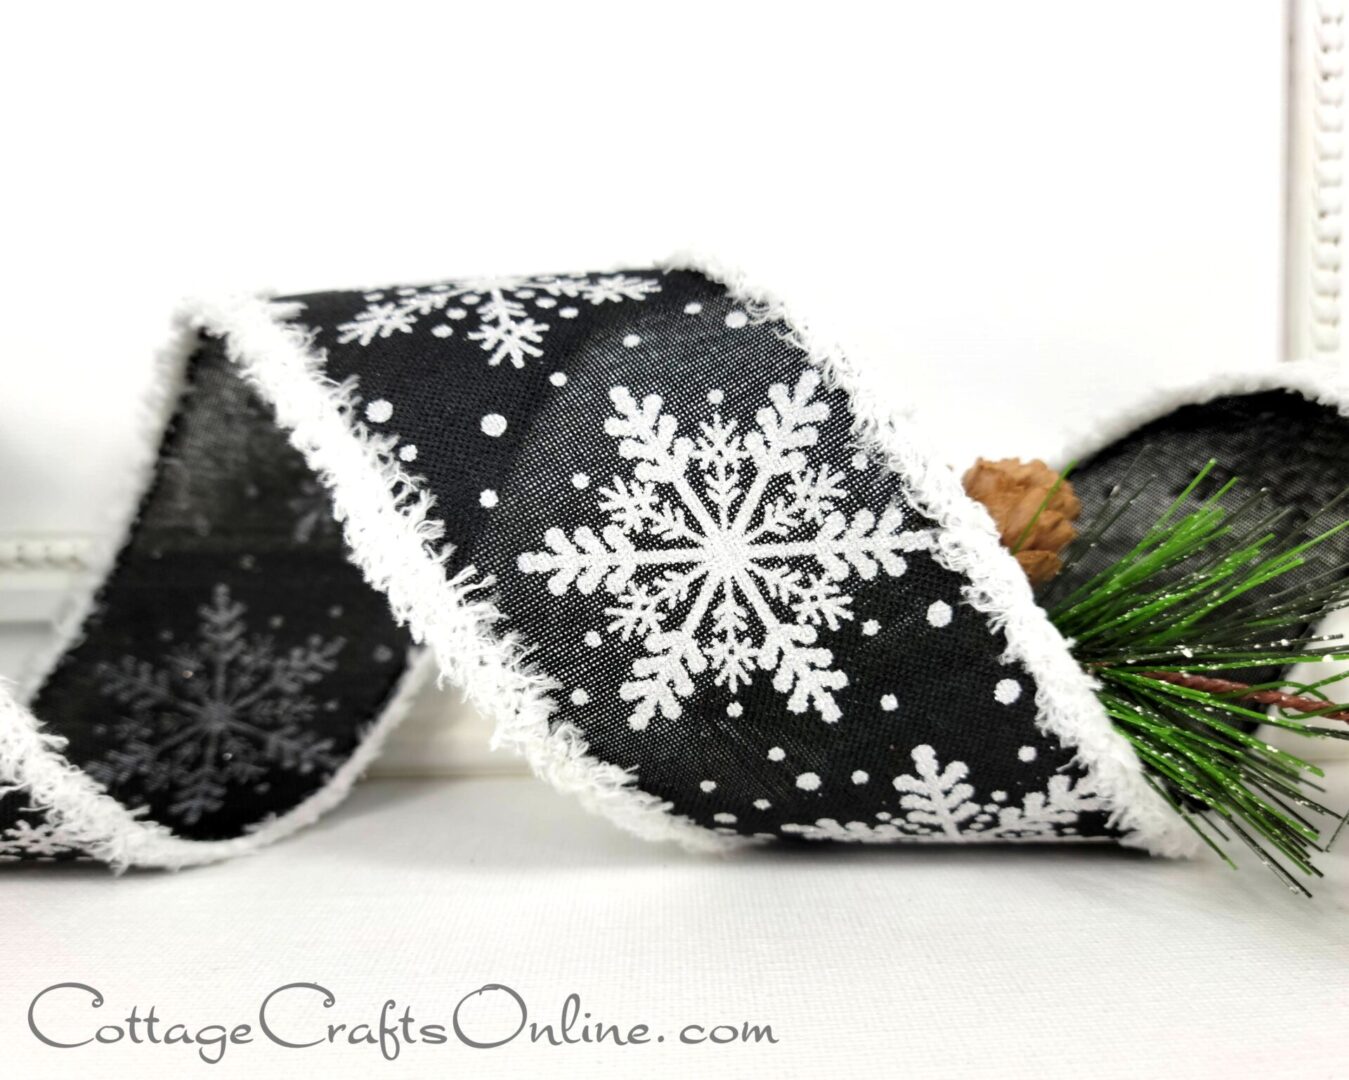 White snowflakes on black with white chenille edge 2.5" wide wired ribbon from the Etsy shop of Cottage Crafts Online.